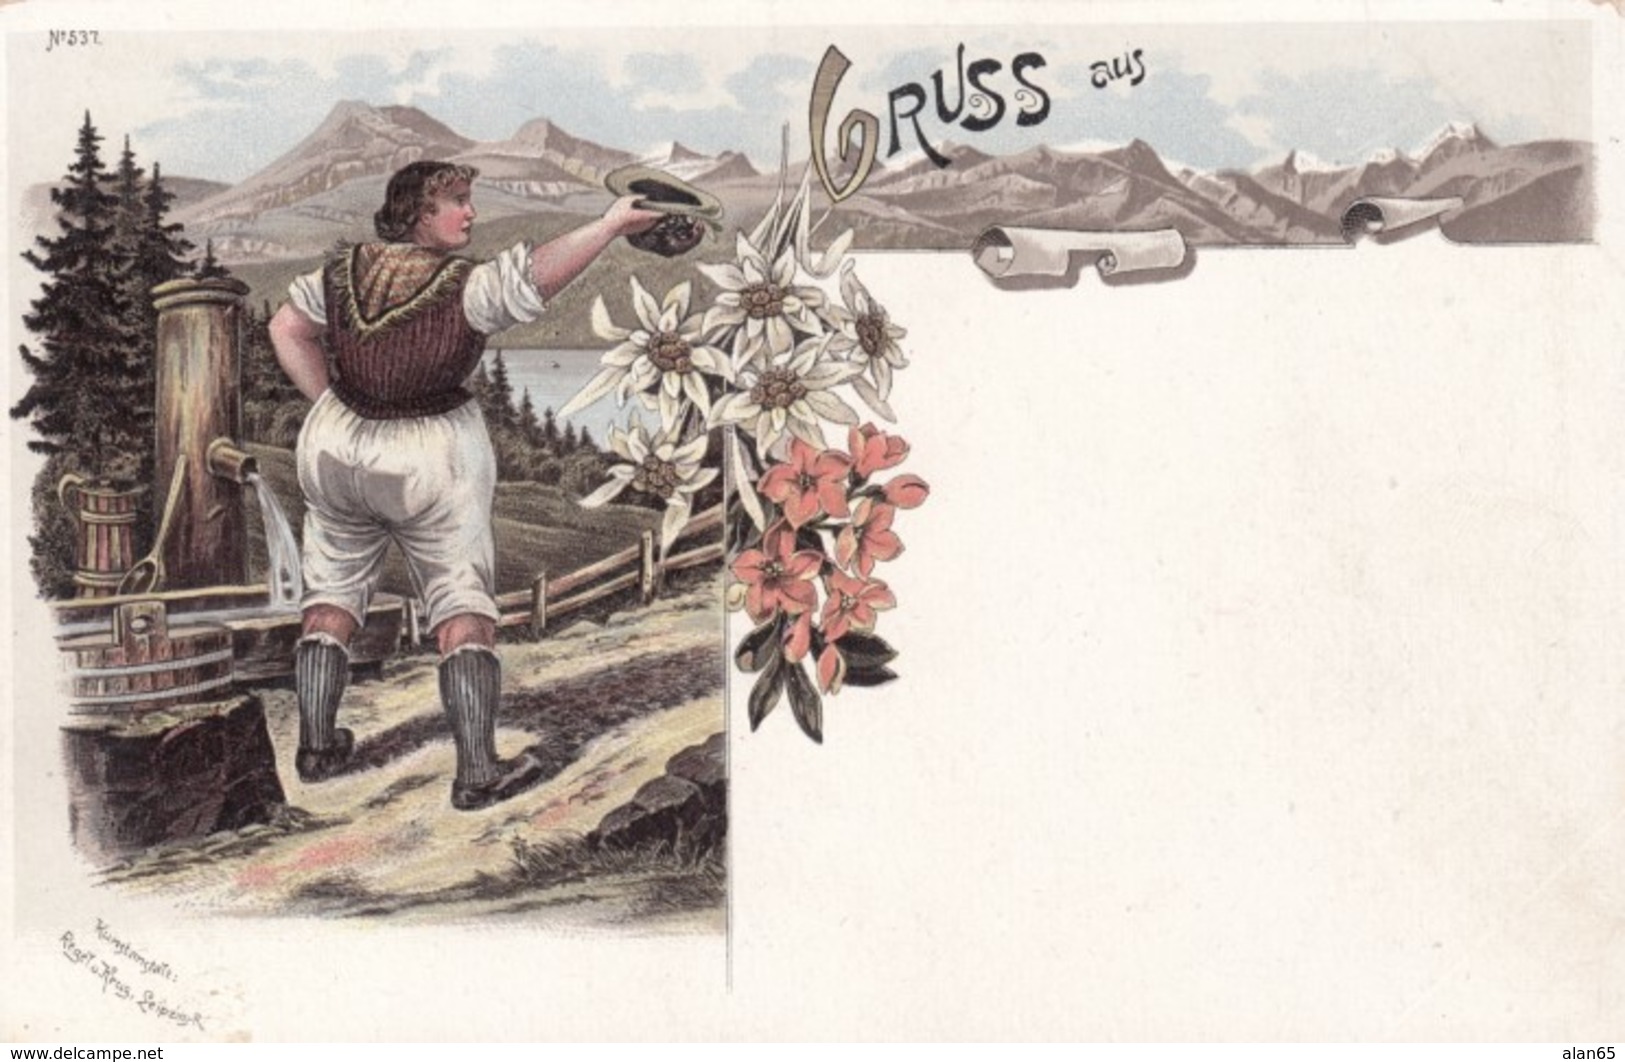 Gruss Aus. . . German Language Greetings Woman In Traditional Fashion, Leipzig Published C1890s/1900s Vintage Postcard - Greetings From...